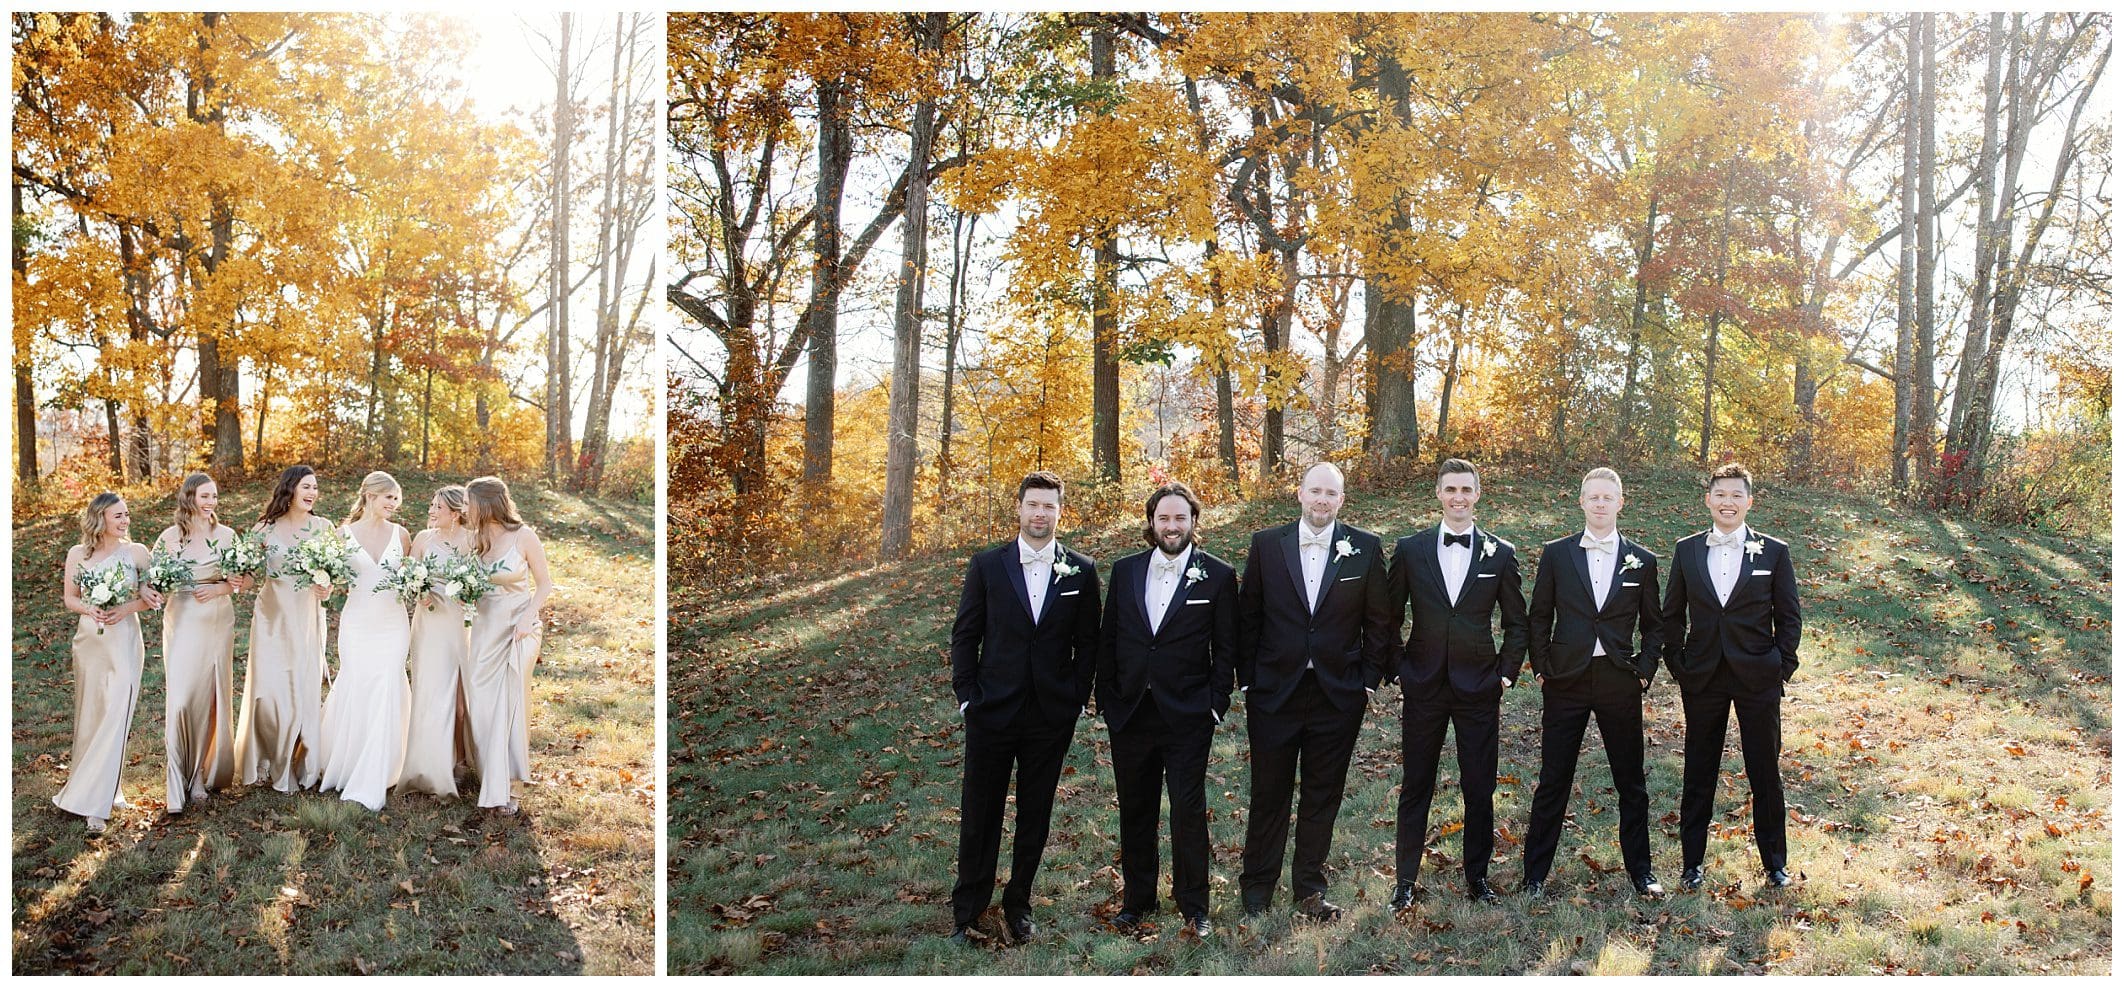 A group of groomsmen in tuxedos at a fall wedding at Crest Center.